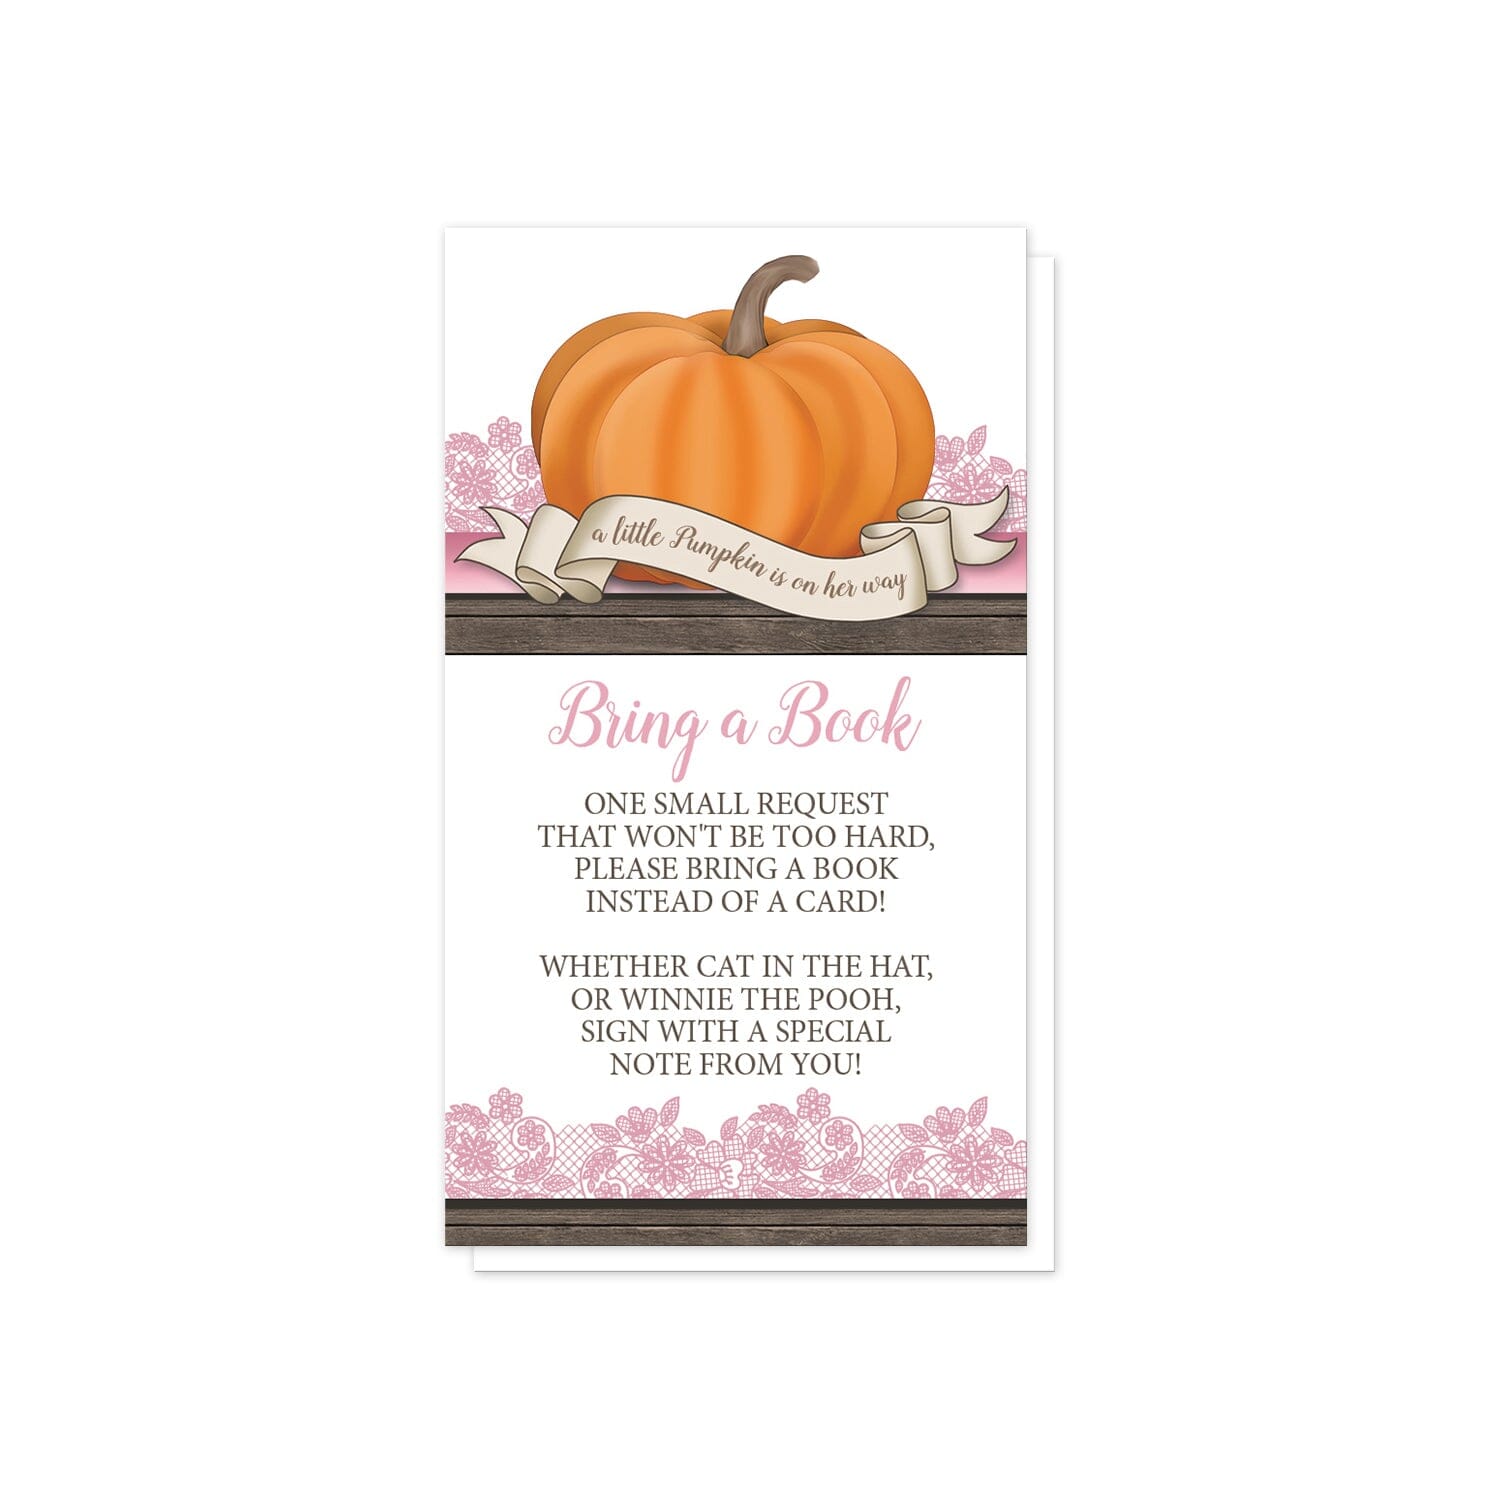 Rustic Orange Pink Pumpkin Bring a Book Cards at Artistically Invited. Cute rustic orange pink pumpkin Bring a Book cards with an illustration of an orange pumpkin on a horizontal pink stripe with pink lace behind it, a wood stripe, and a tiny ribbon banner that reads: "a little pumpkin is on her way". Your book request details are printed in pink and brown in the white area of the cards below the pumpkin. 